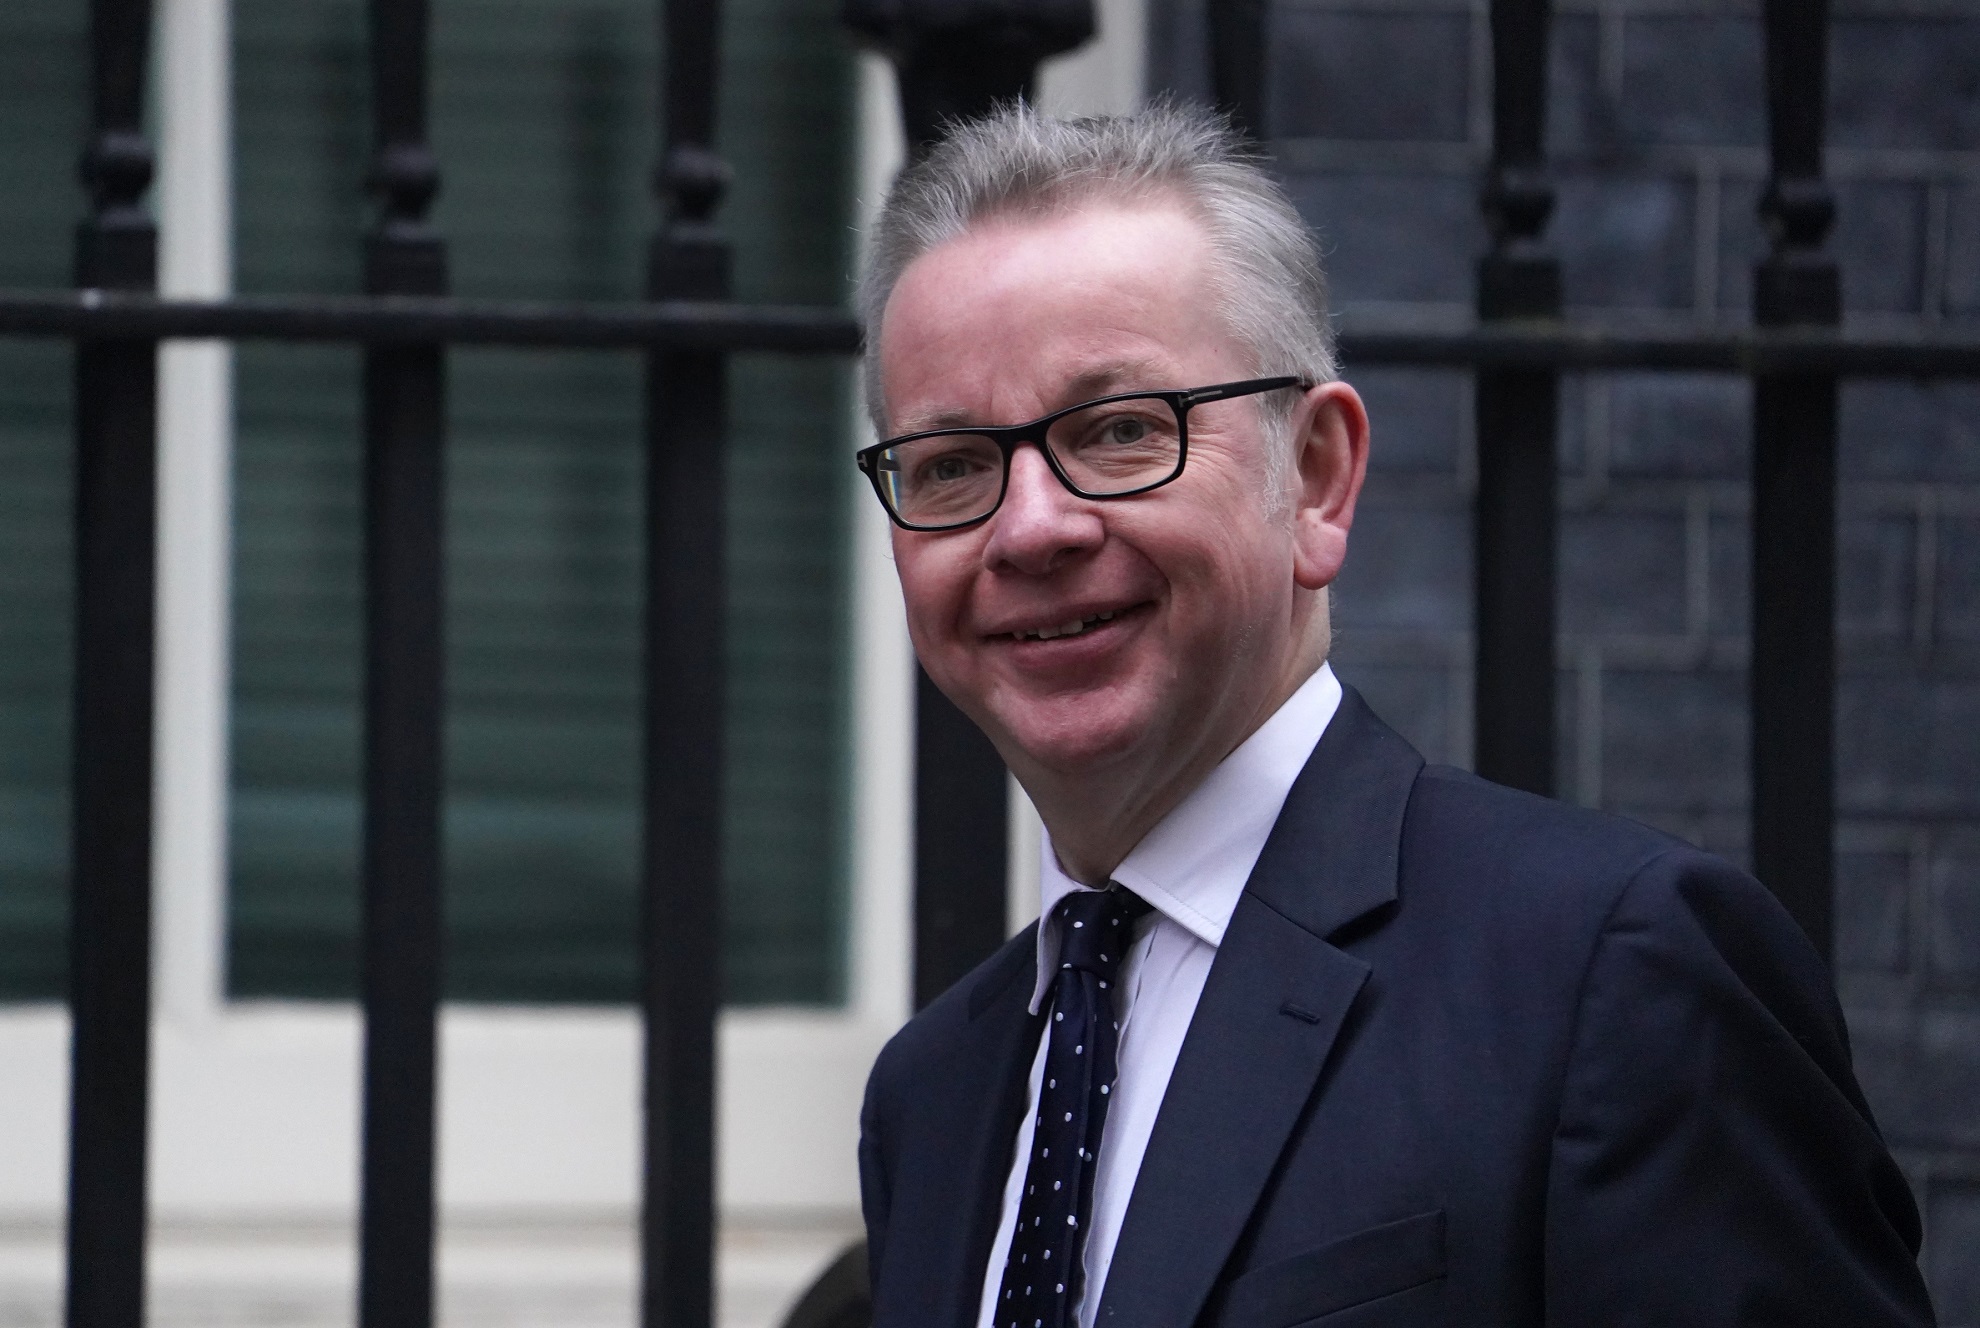 Michael Gove: Latest UK Government figure to self-isolate.